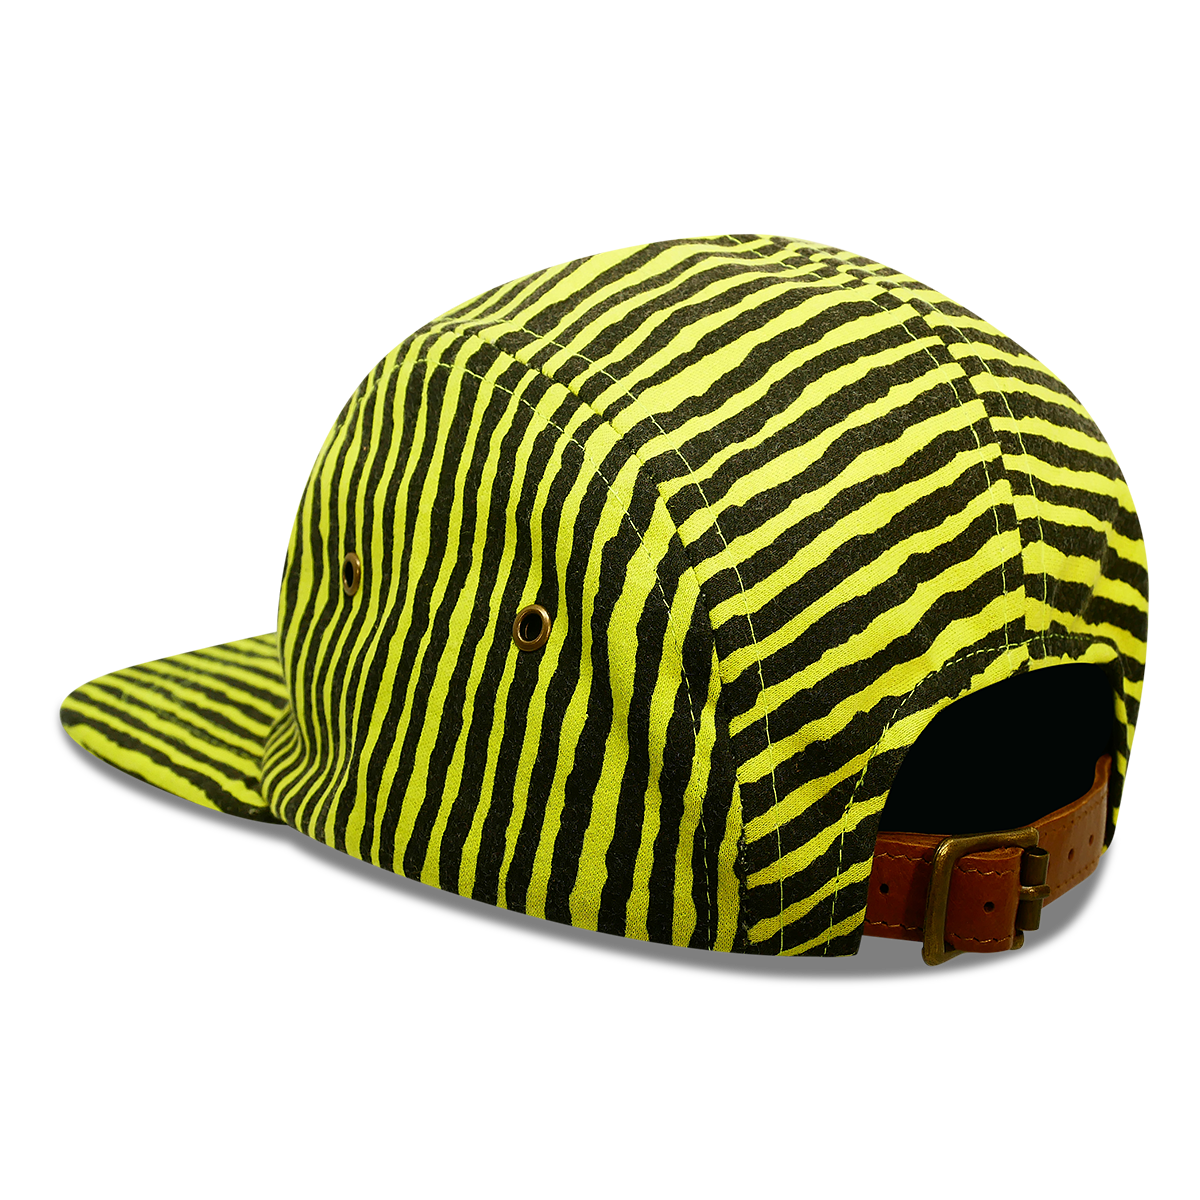 Eye of the tiger- 5 panel